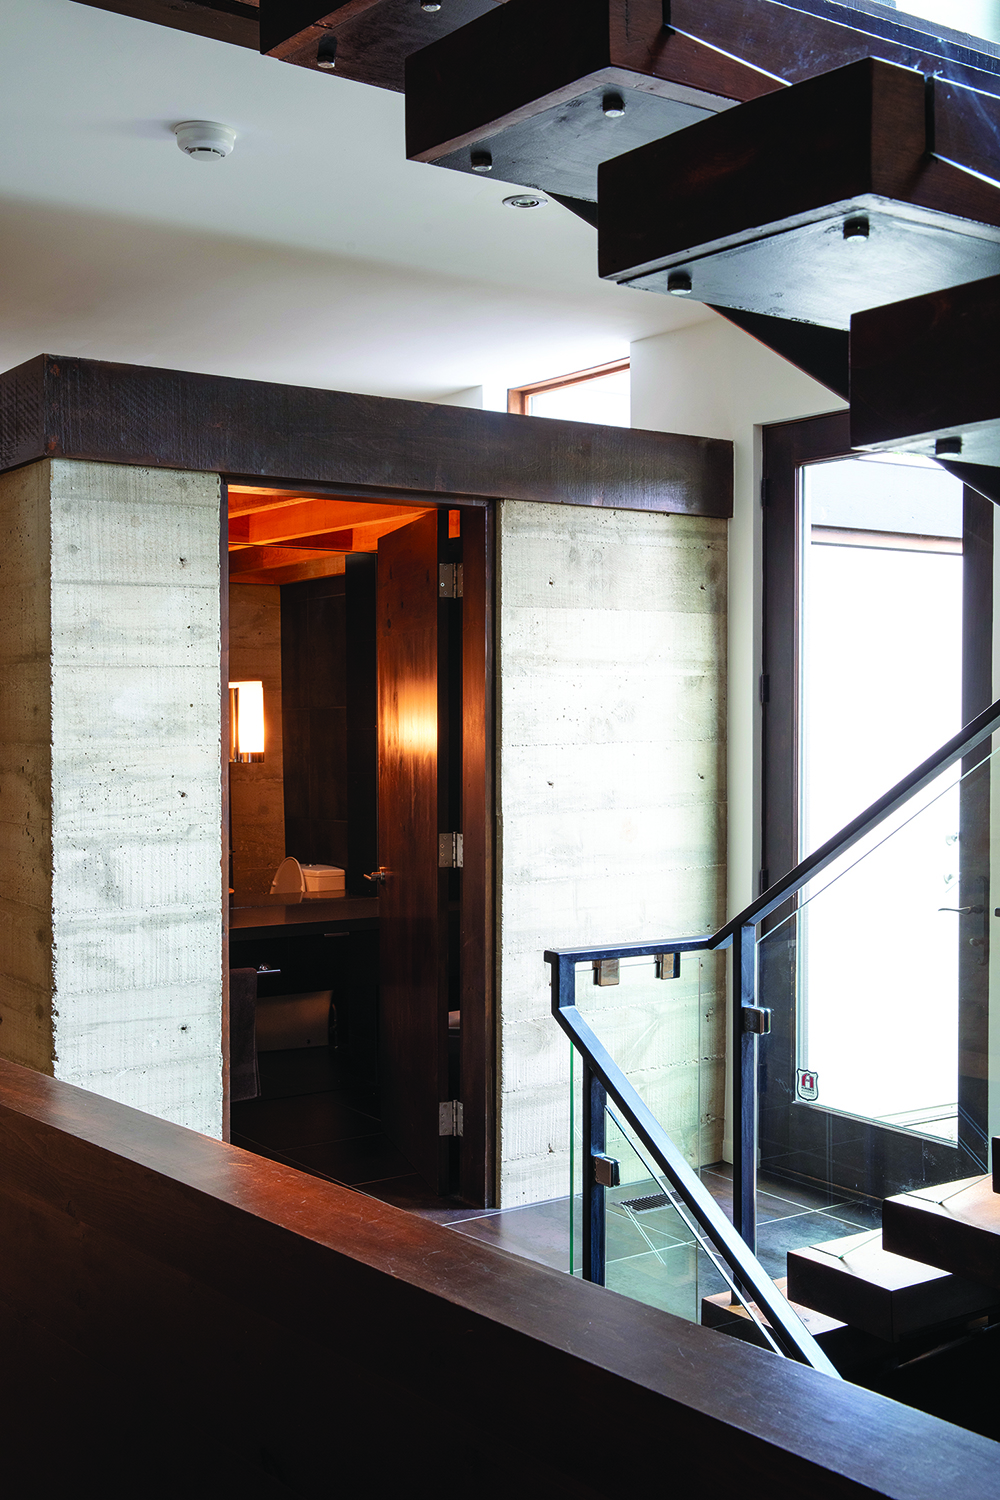 The main-floor powder room sits in a boarded concrete block with open space above.